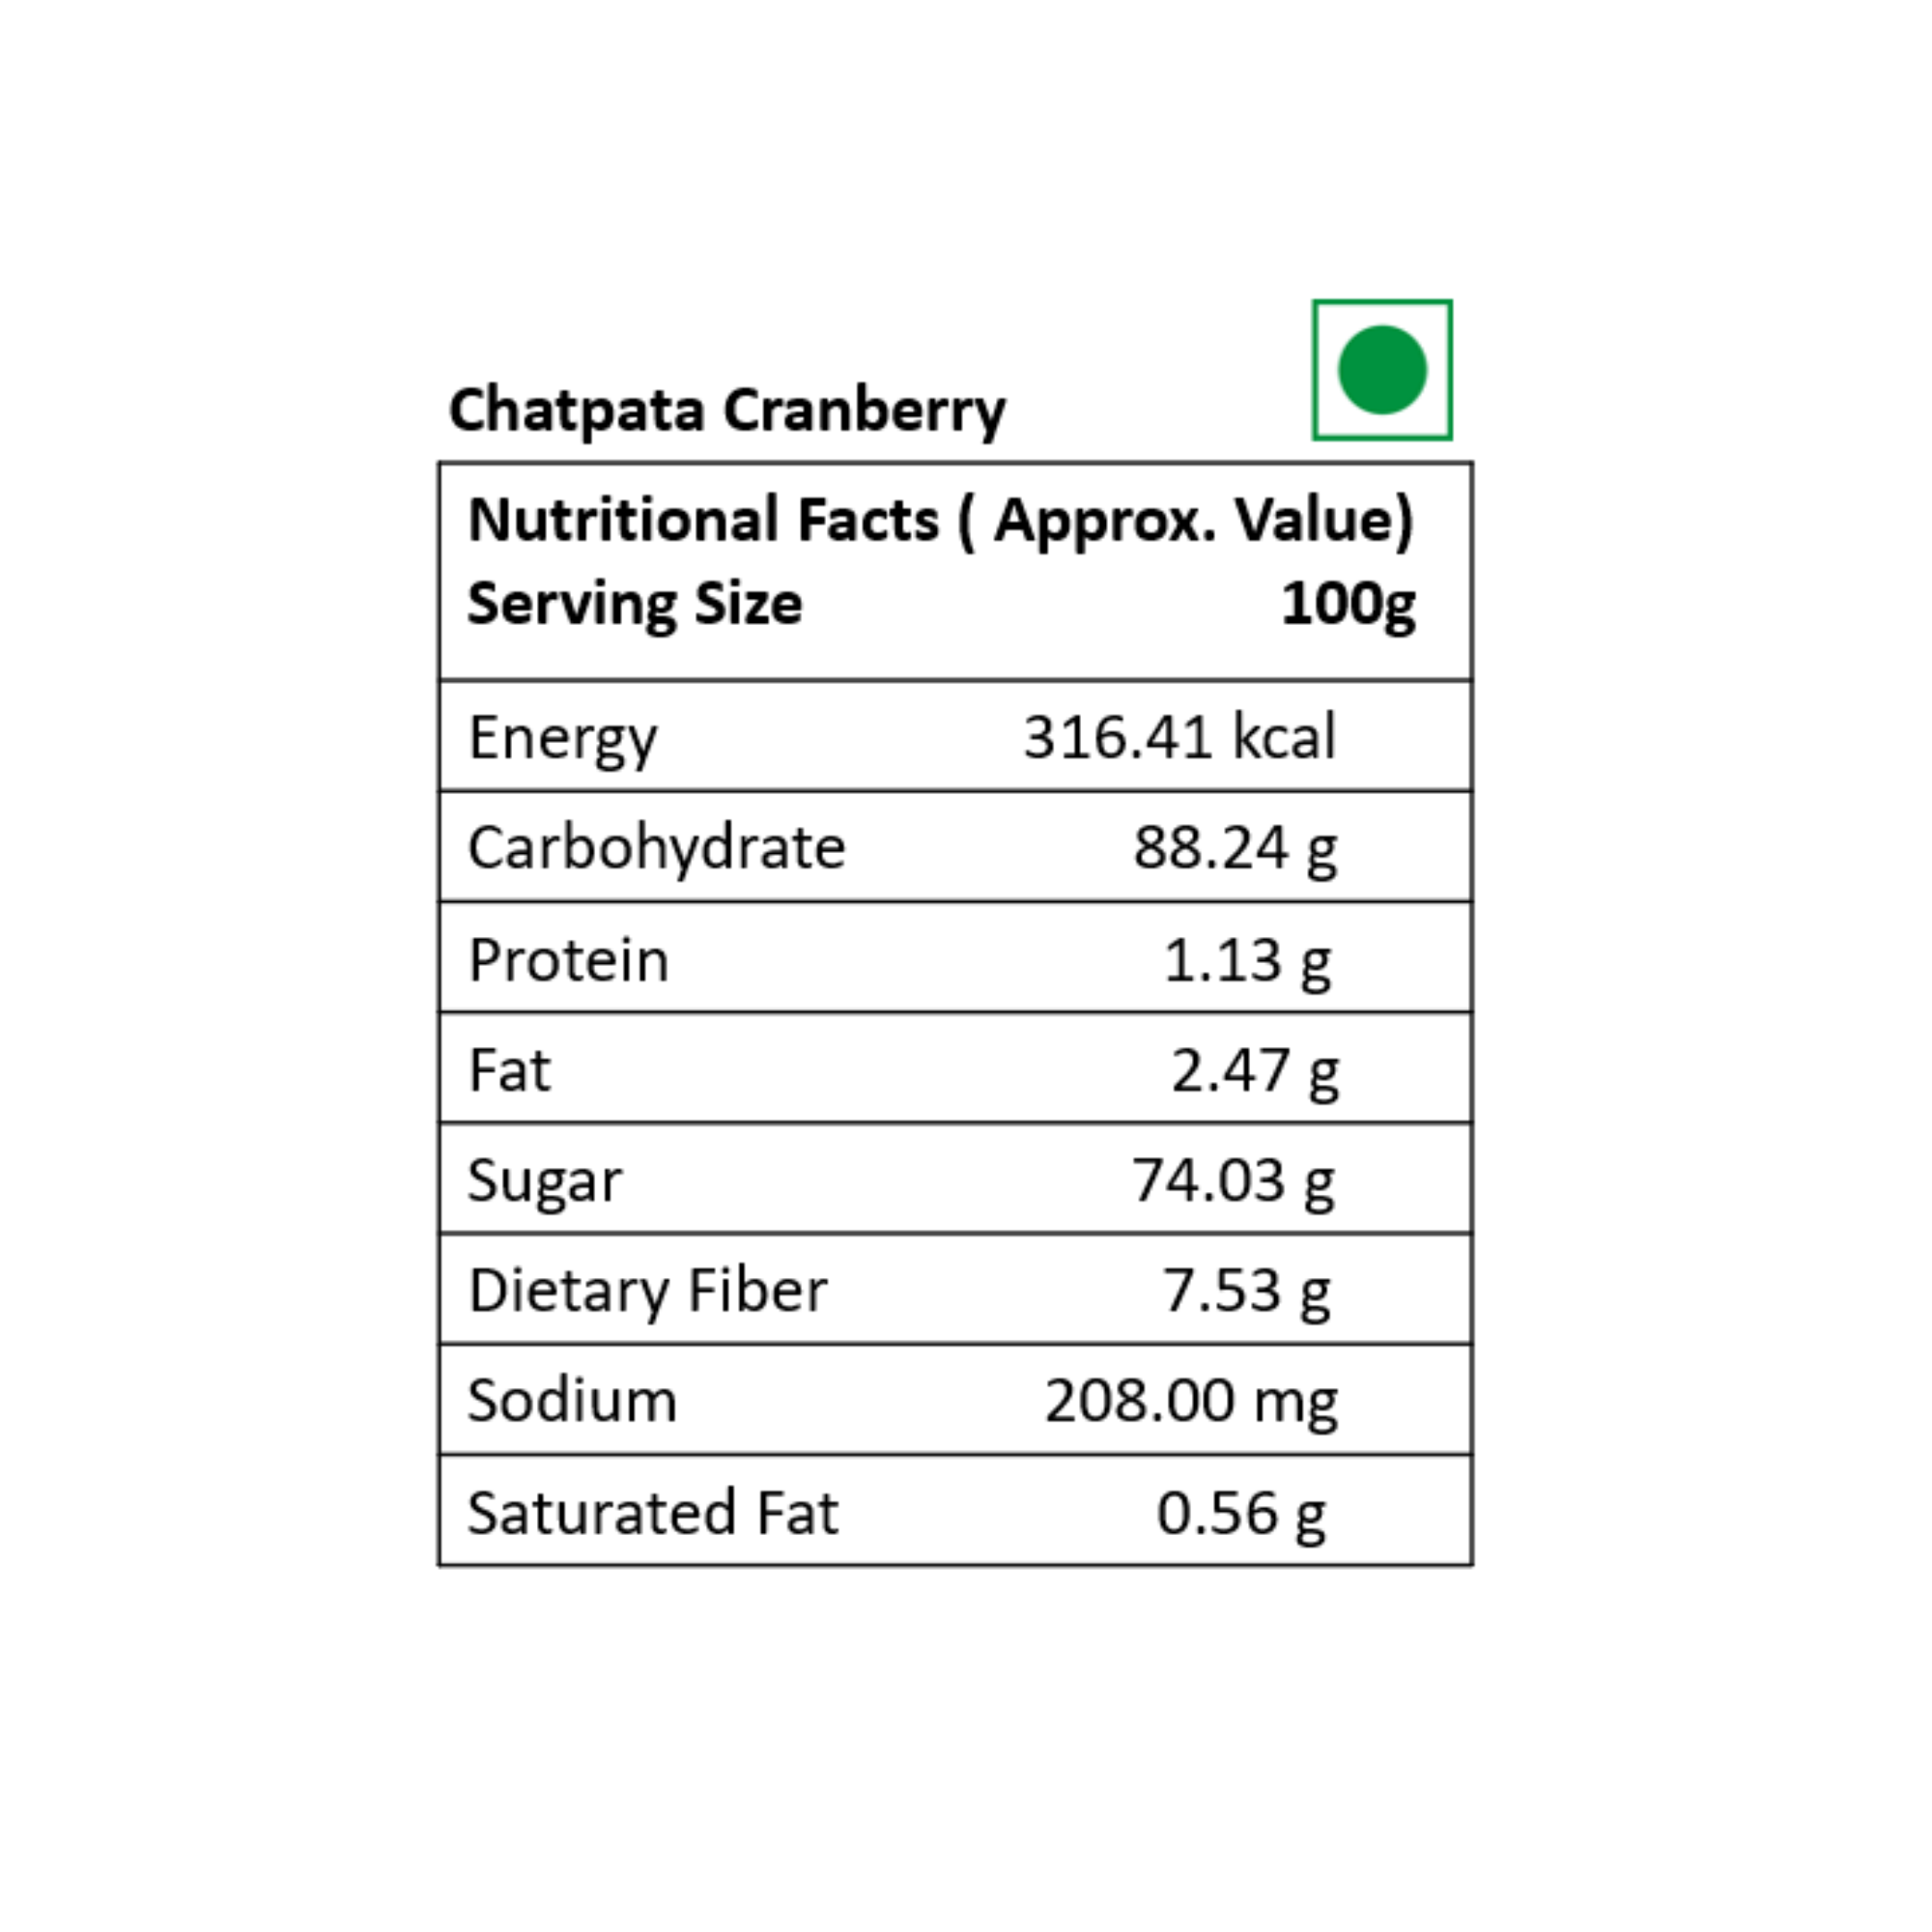 Carnival Chatpata Cranberry 200g